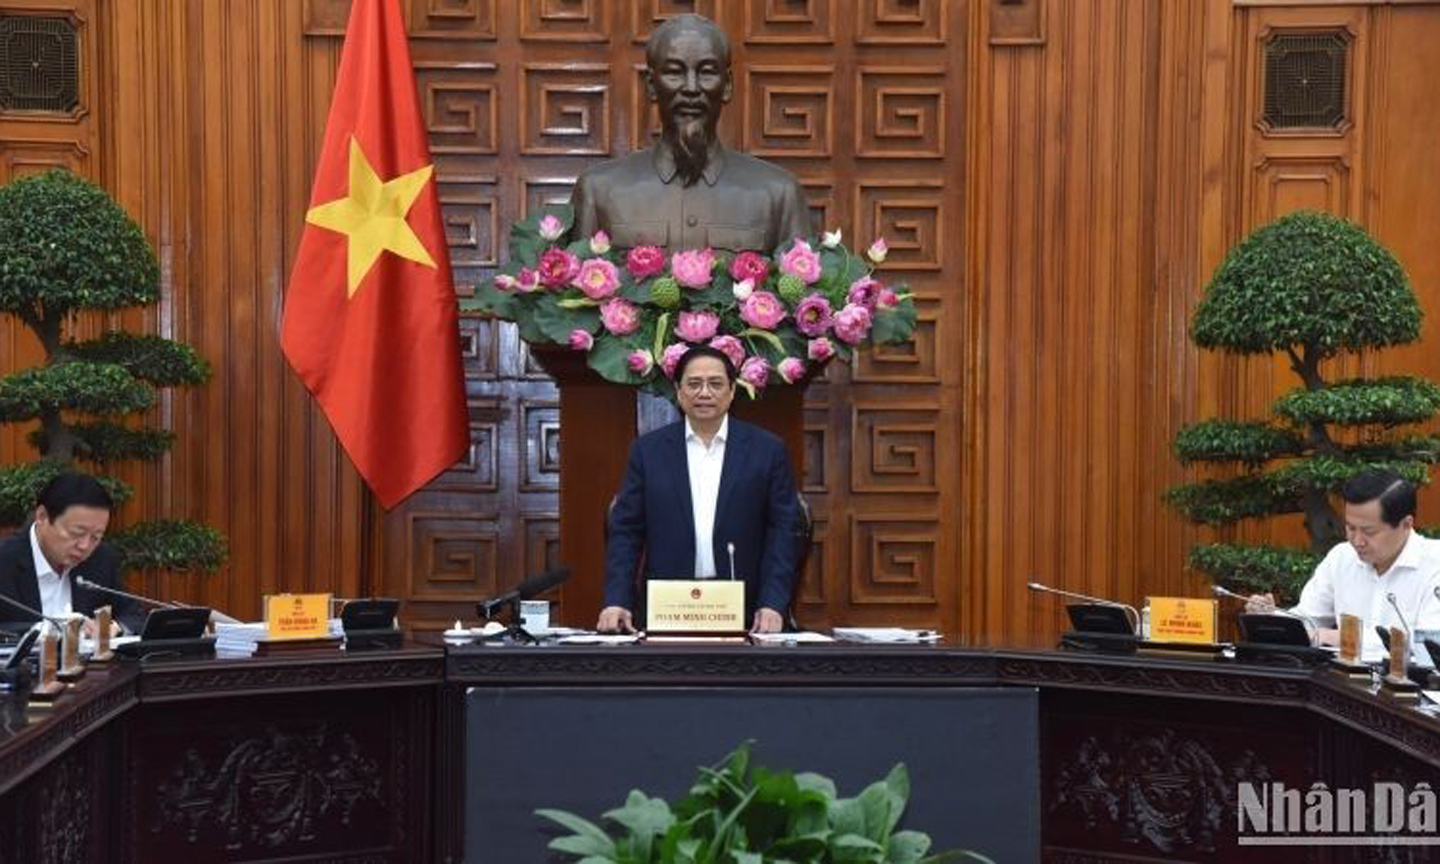 Prime Minister Pham Minh Chinh sepaking at the meeting (Photo: NDO).